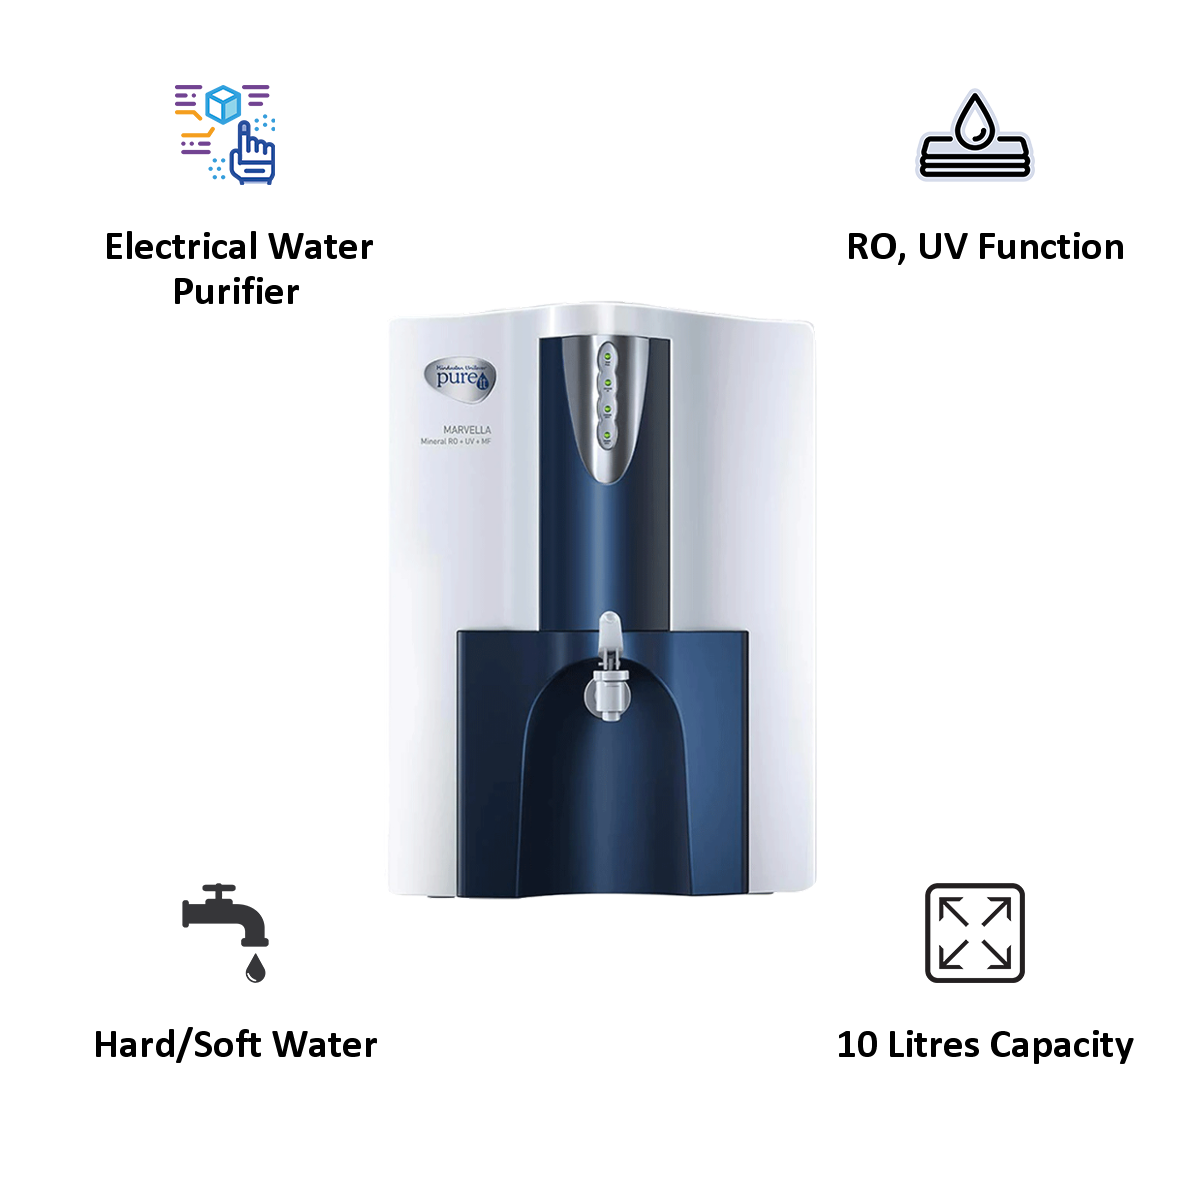 Pureit Marvella Eco RO+UV Electrical Water Purifier (7 Stage Purification, WPNT500, White and Blue)_3